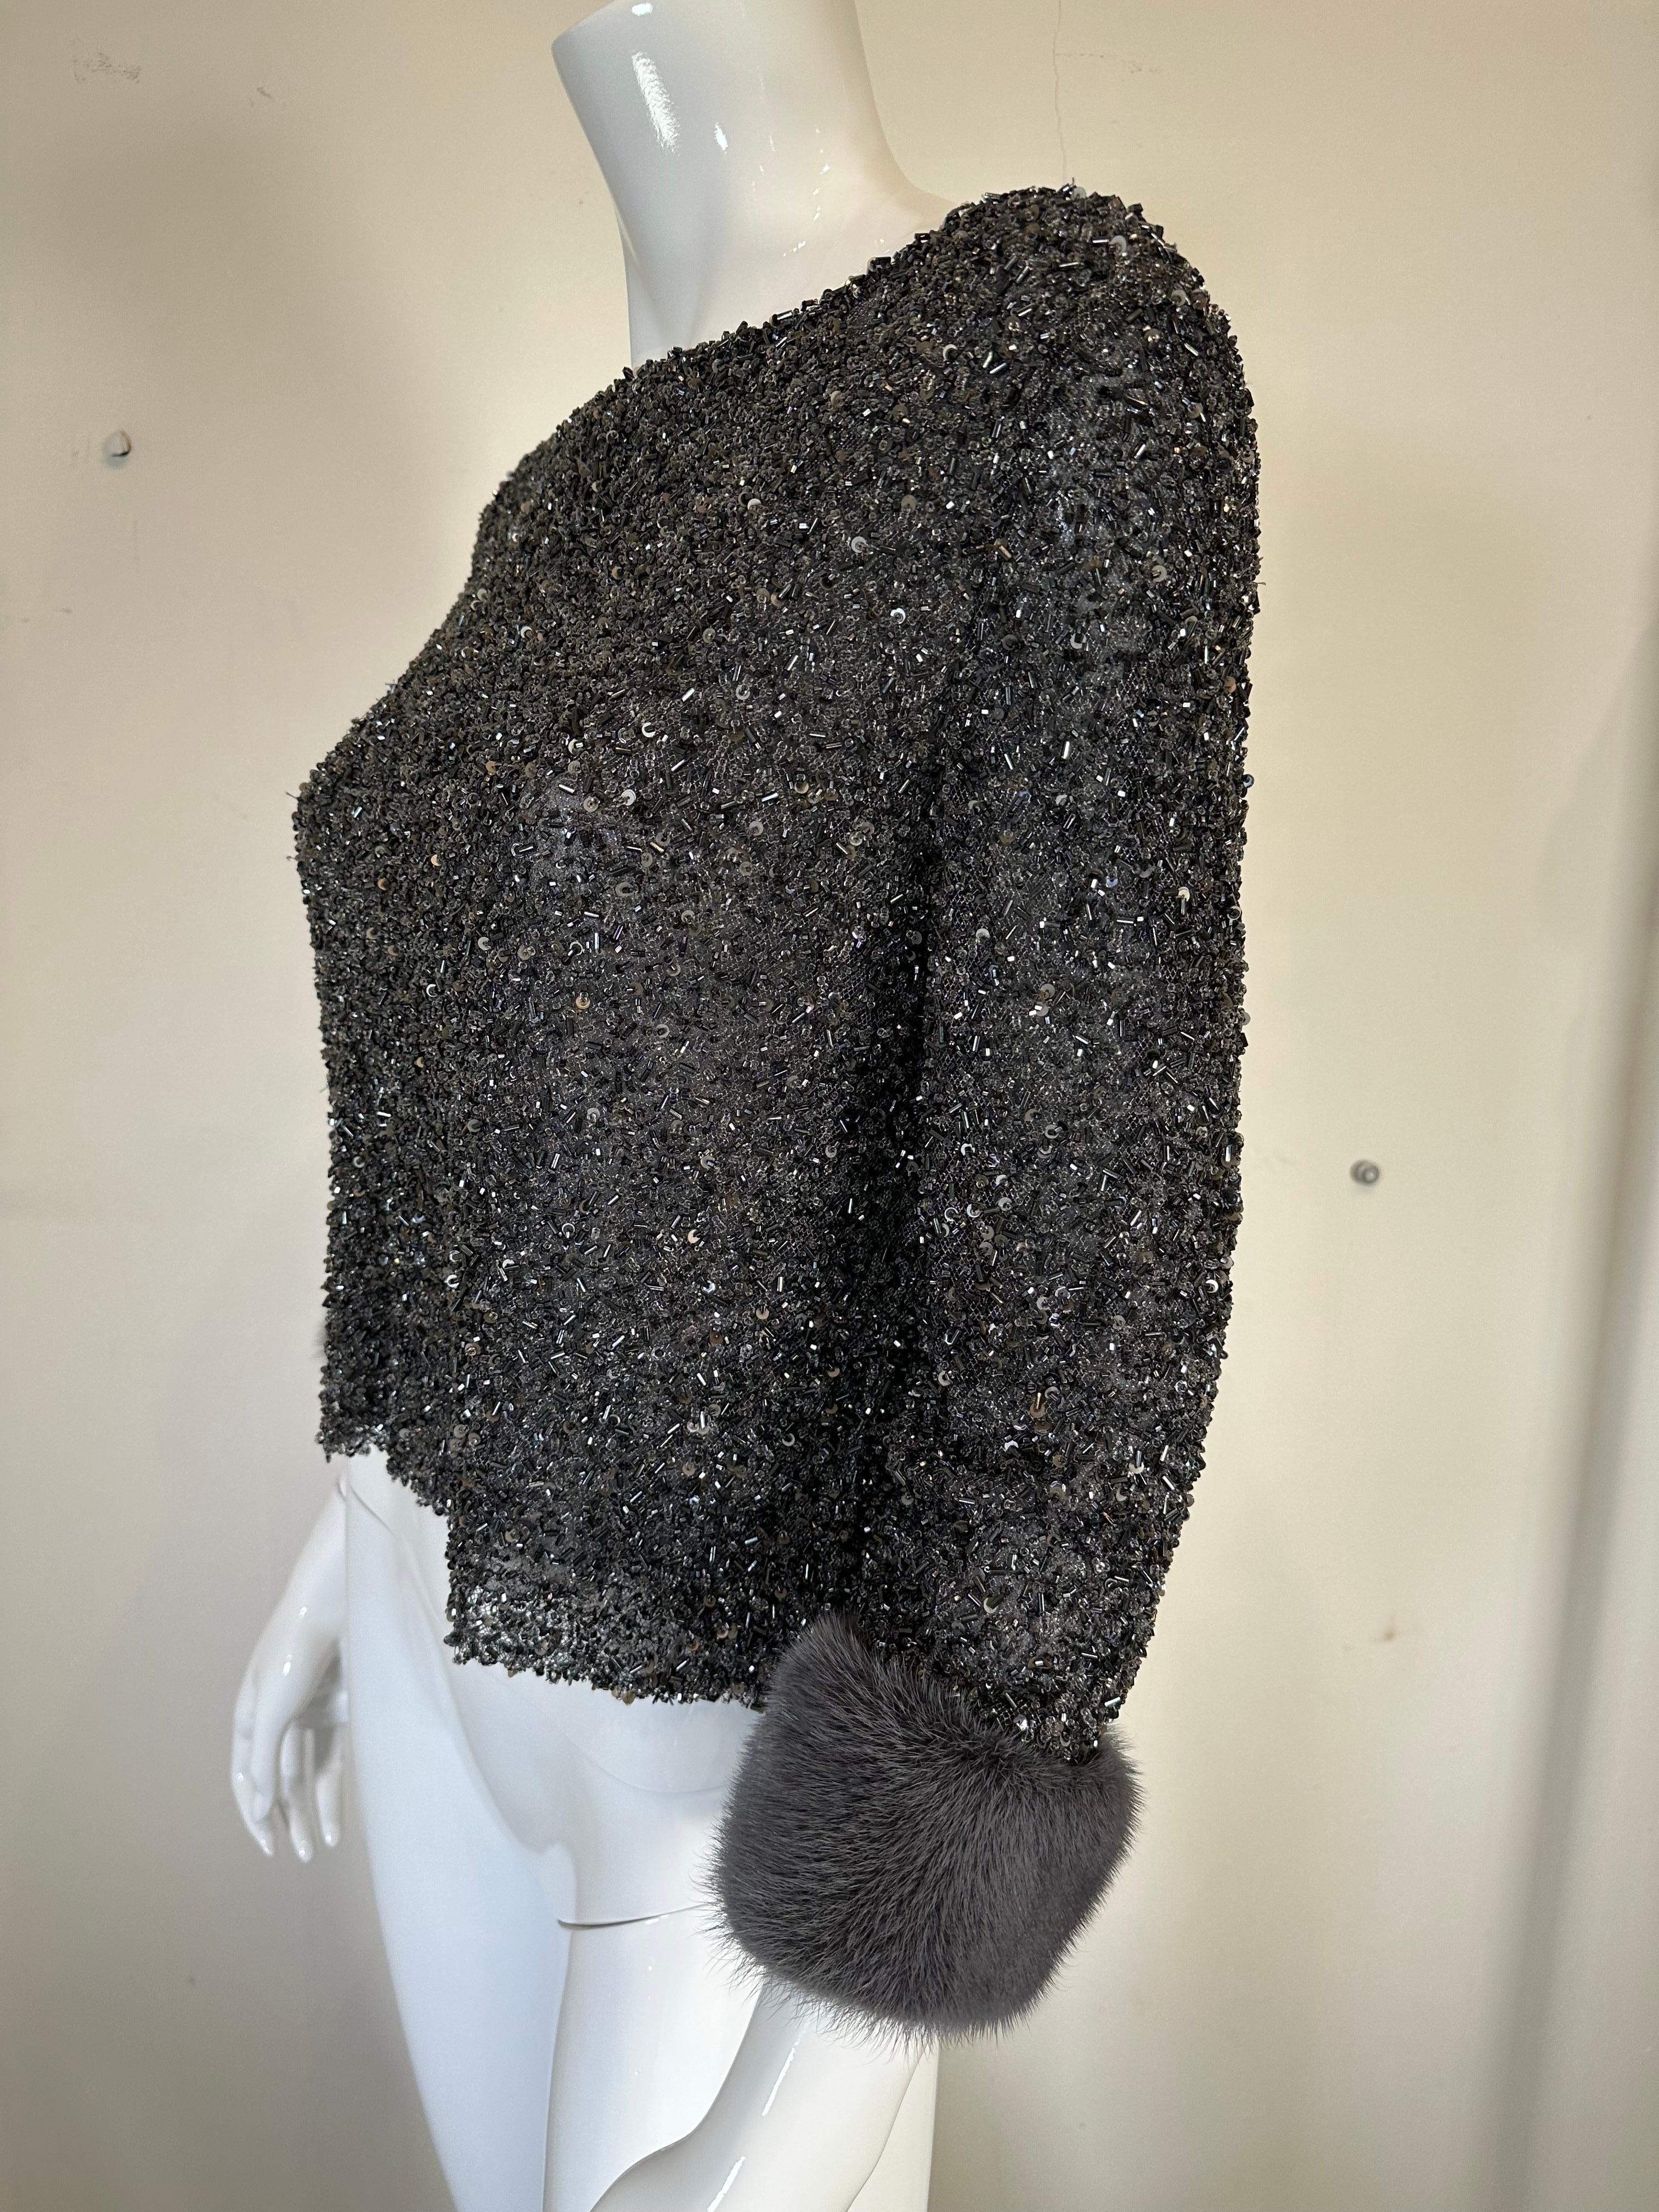 Badgley Mischka glittery black/steely grey  glass beaded evening top, with bateau neckline, 3/4 length sleeves and grey mink cuffs. 
This beautiful top is lined in grey silk chiffon. Pull on style, closes at the side with a zipper. Perfect with